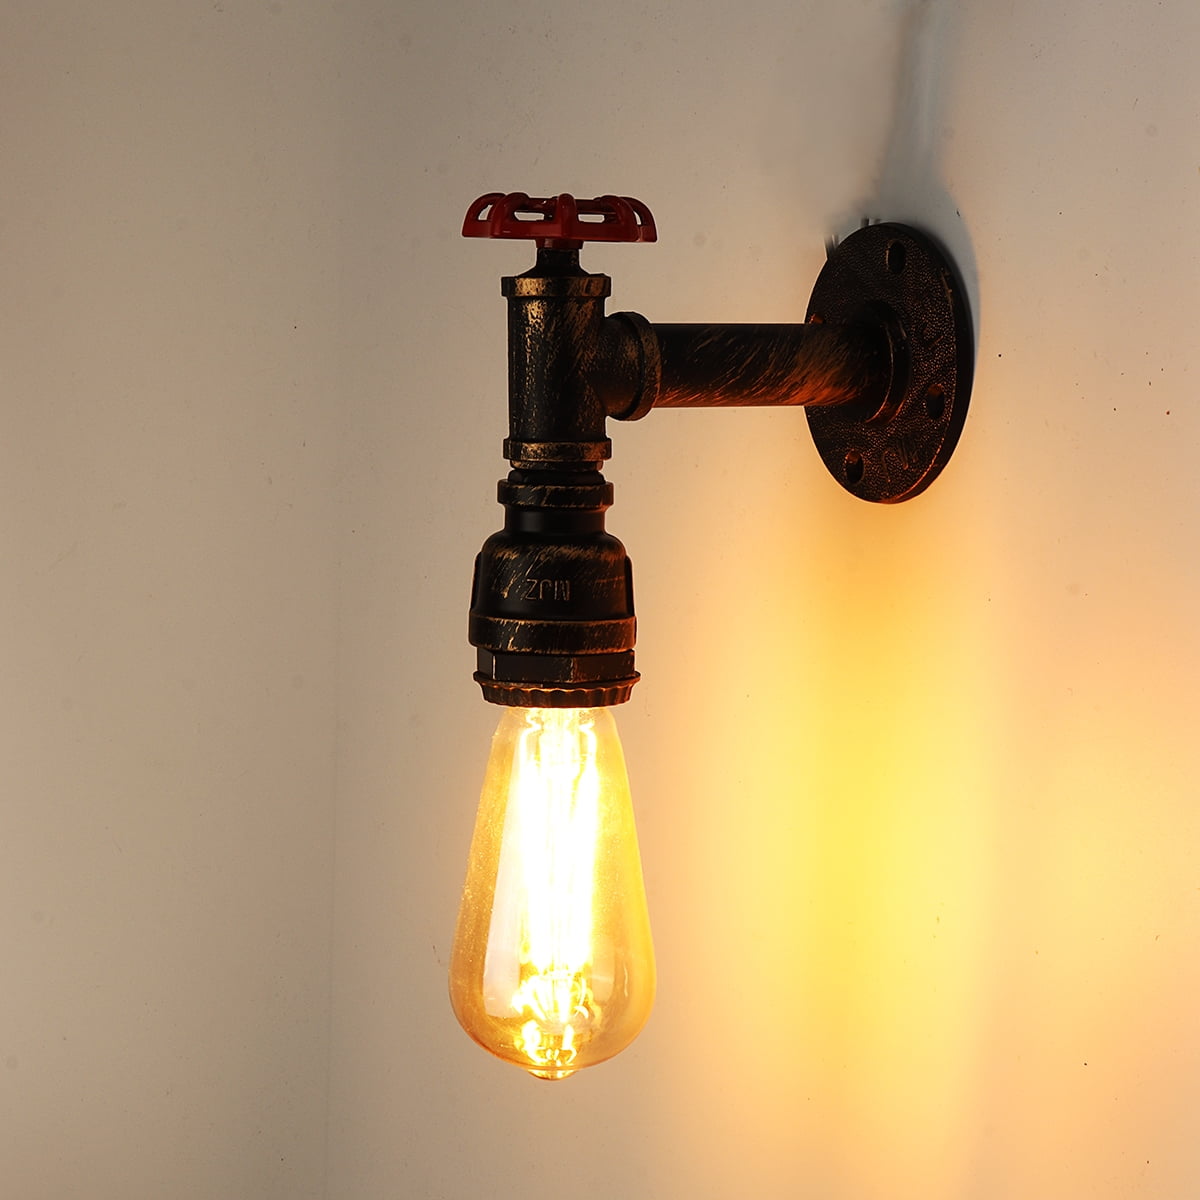 Vintage Industrial Sconce Loft Rustic Water Pipe Wall Light Porch Steampunk Lamp 